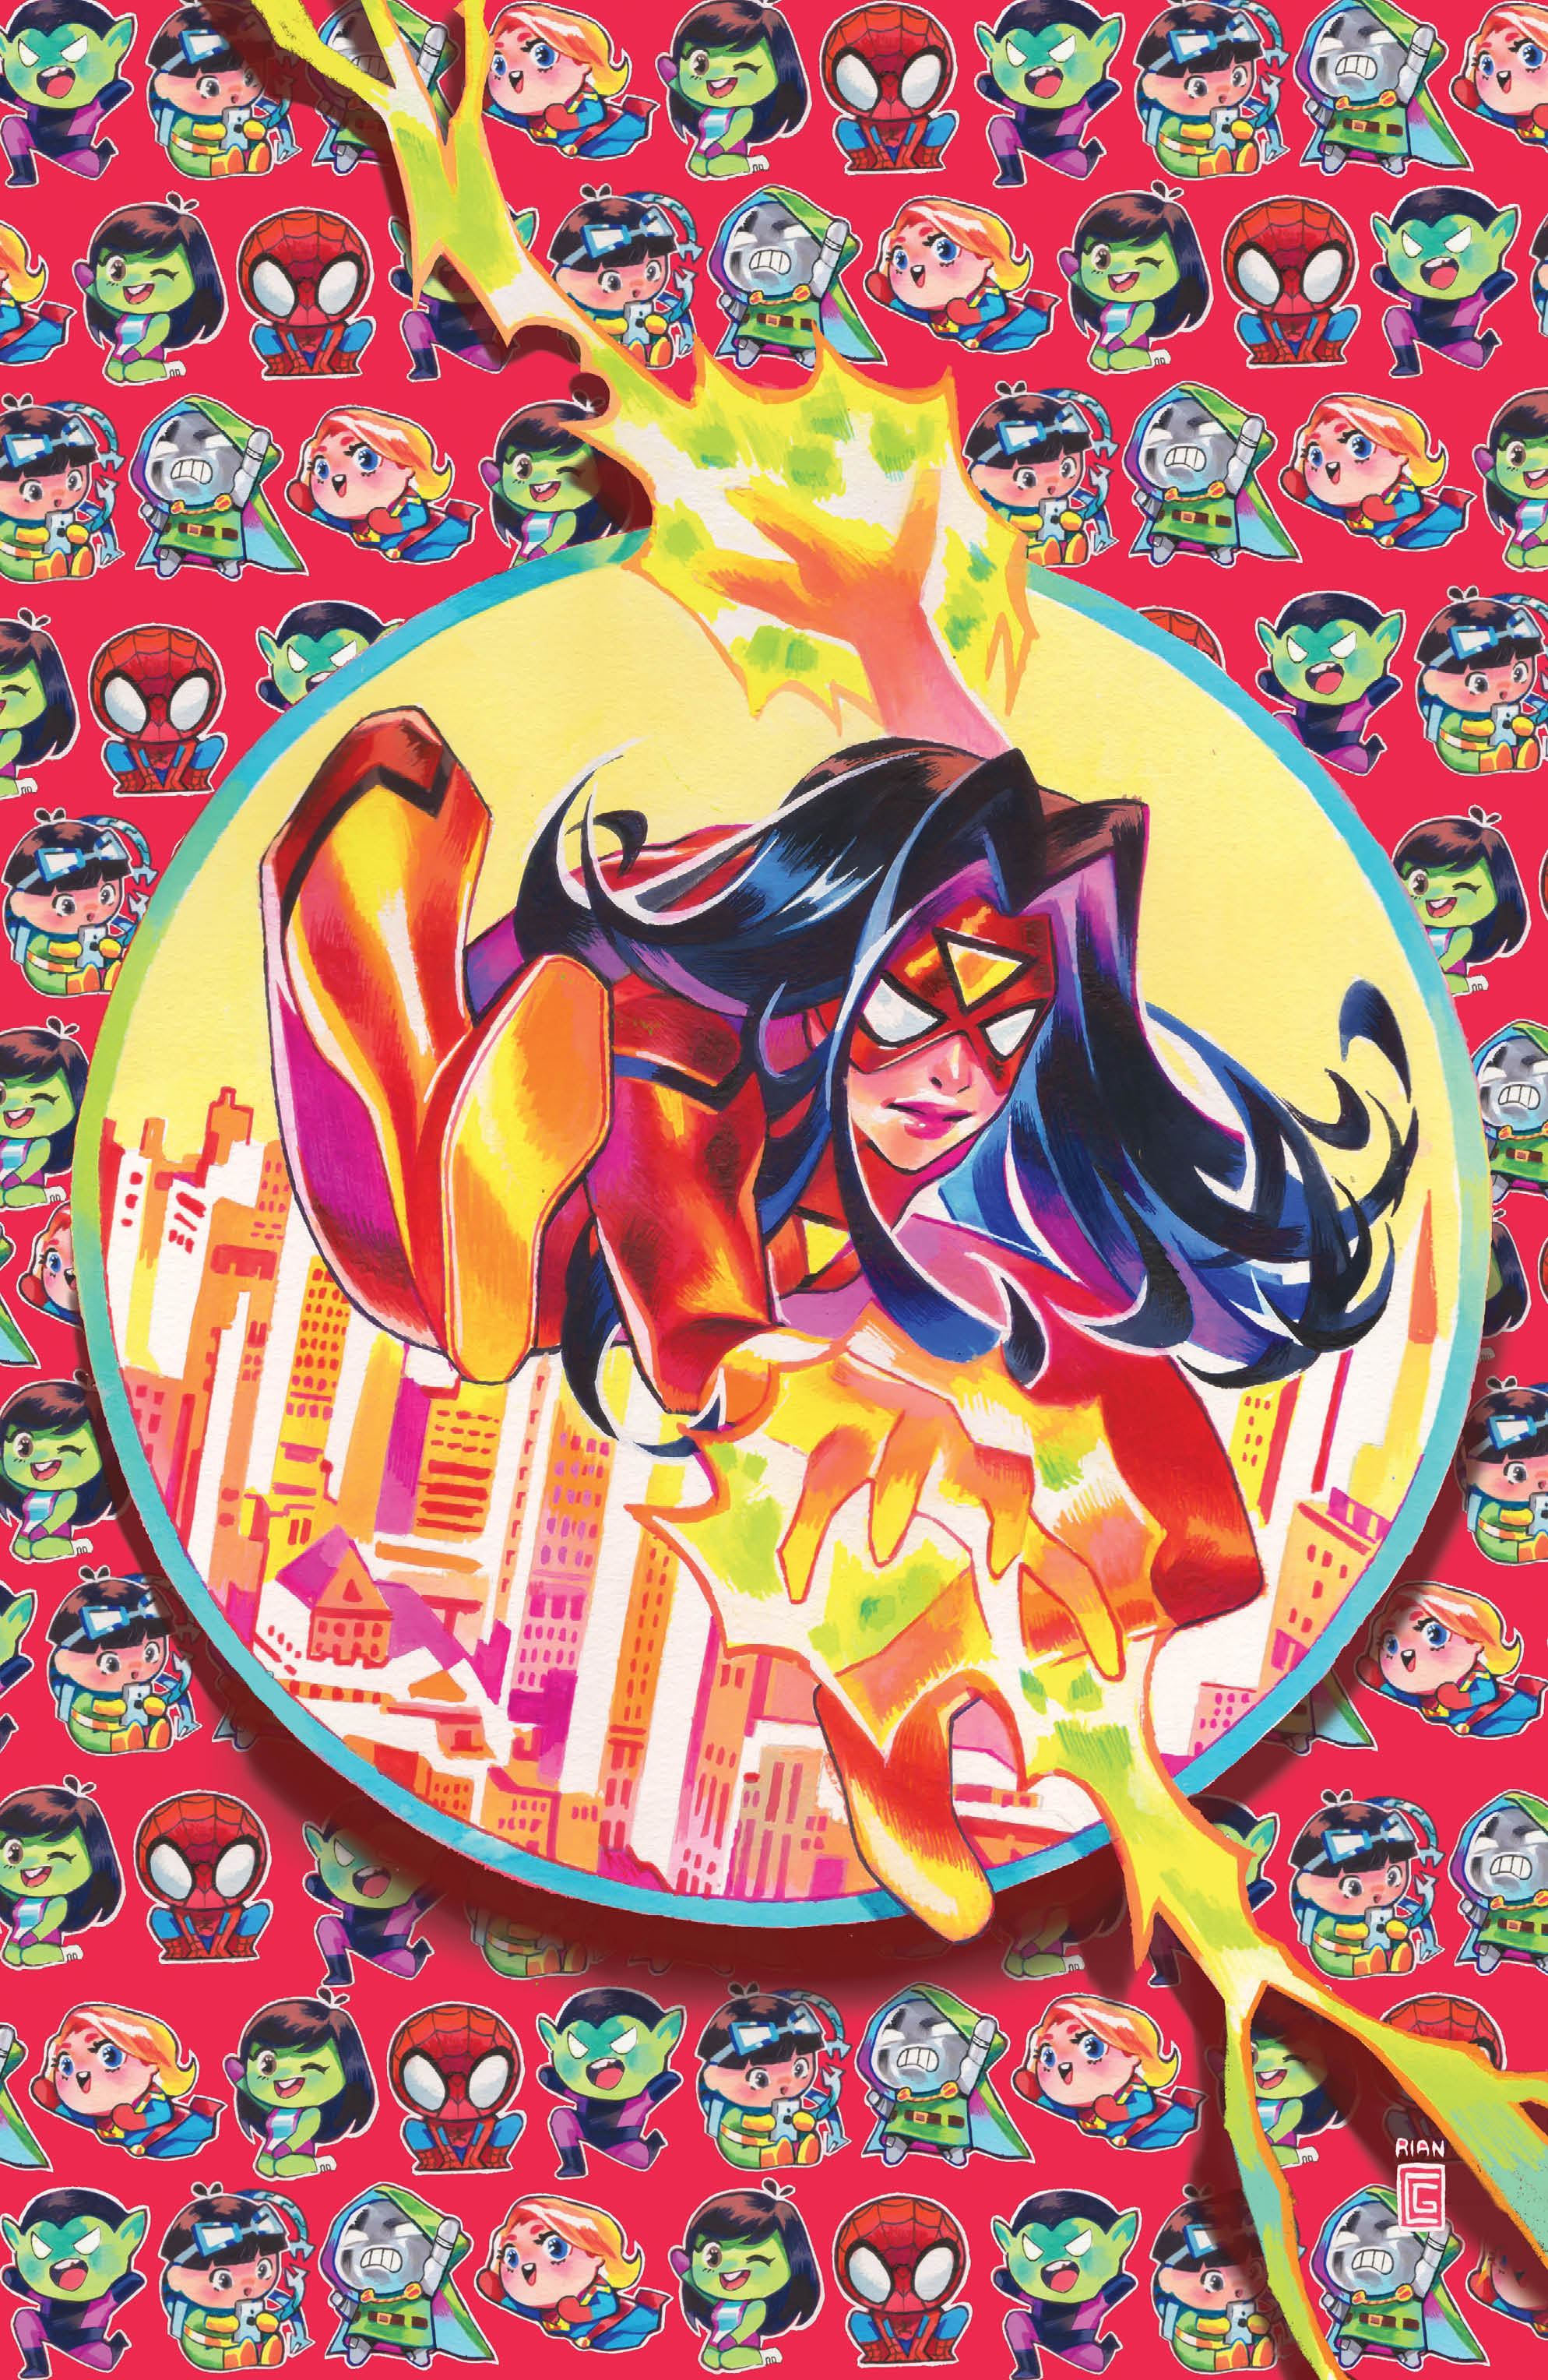 SPIDER-WOMAN #5 RIAN GONZALES EXCLUSIVE VARIANT